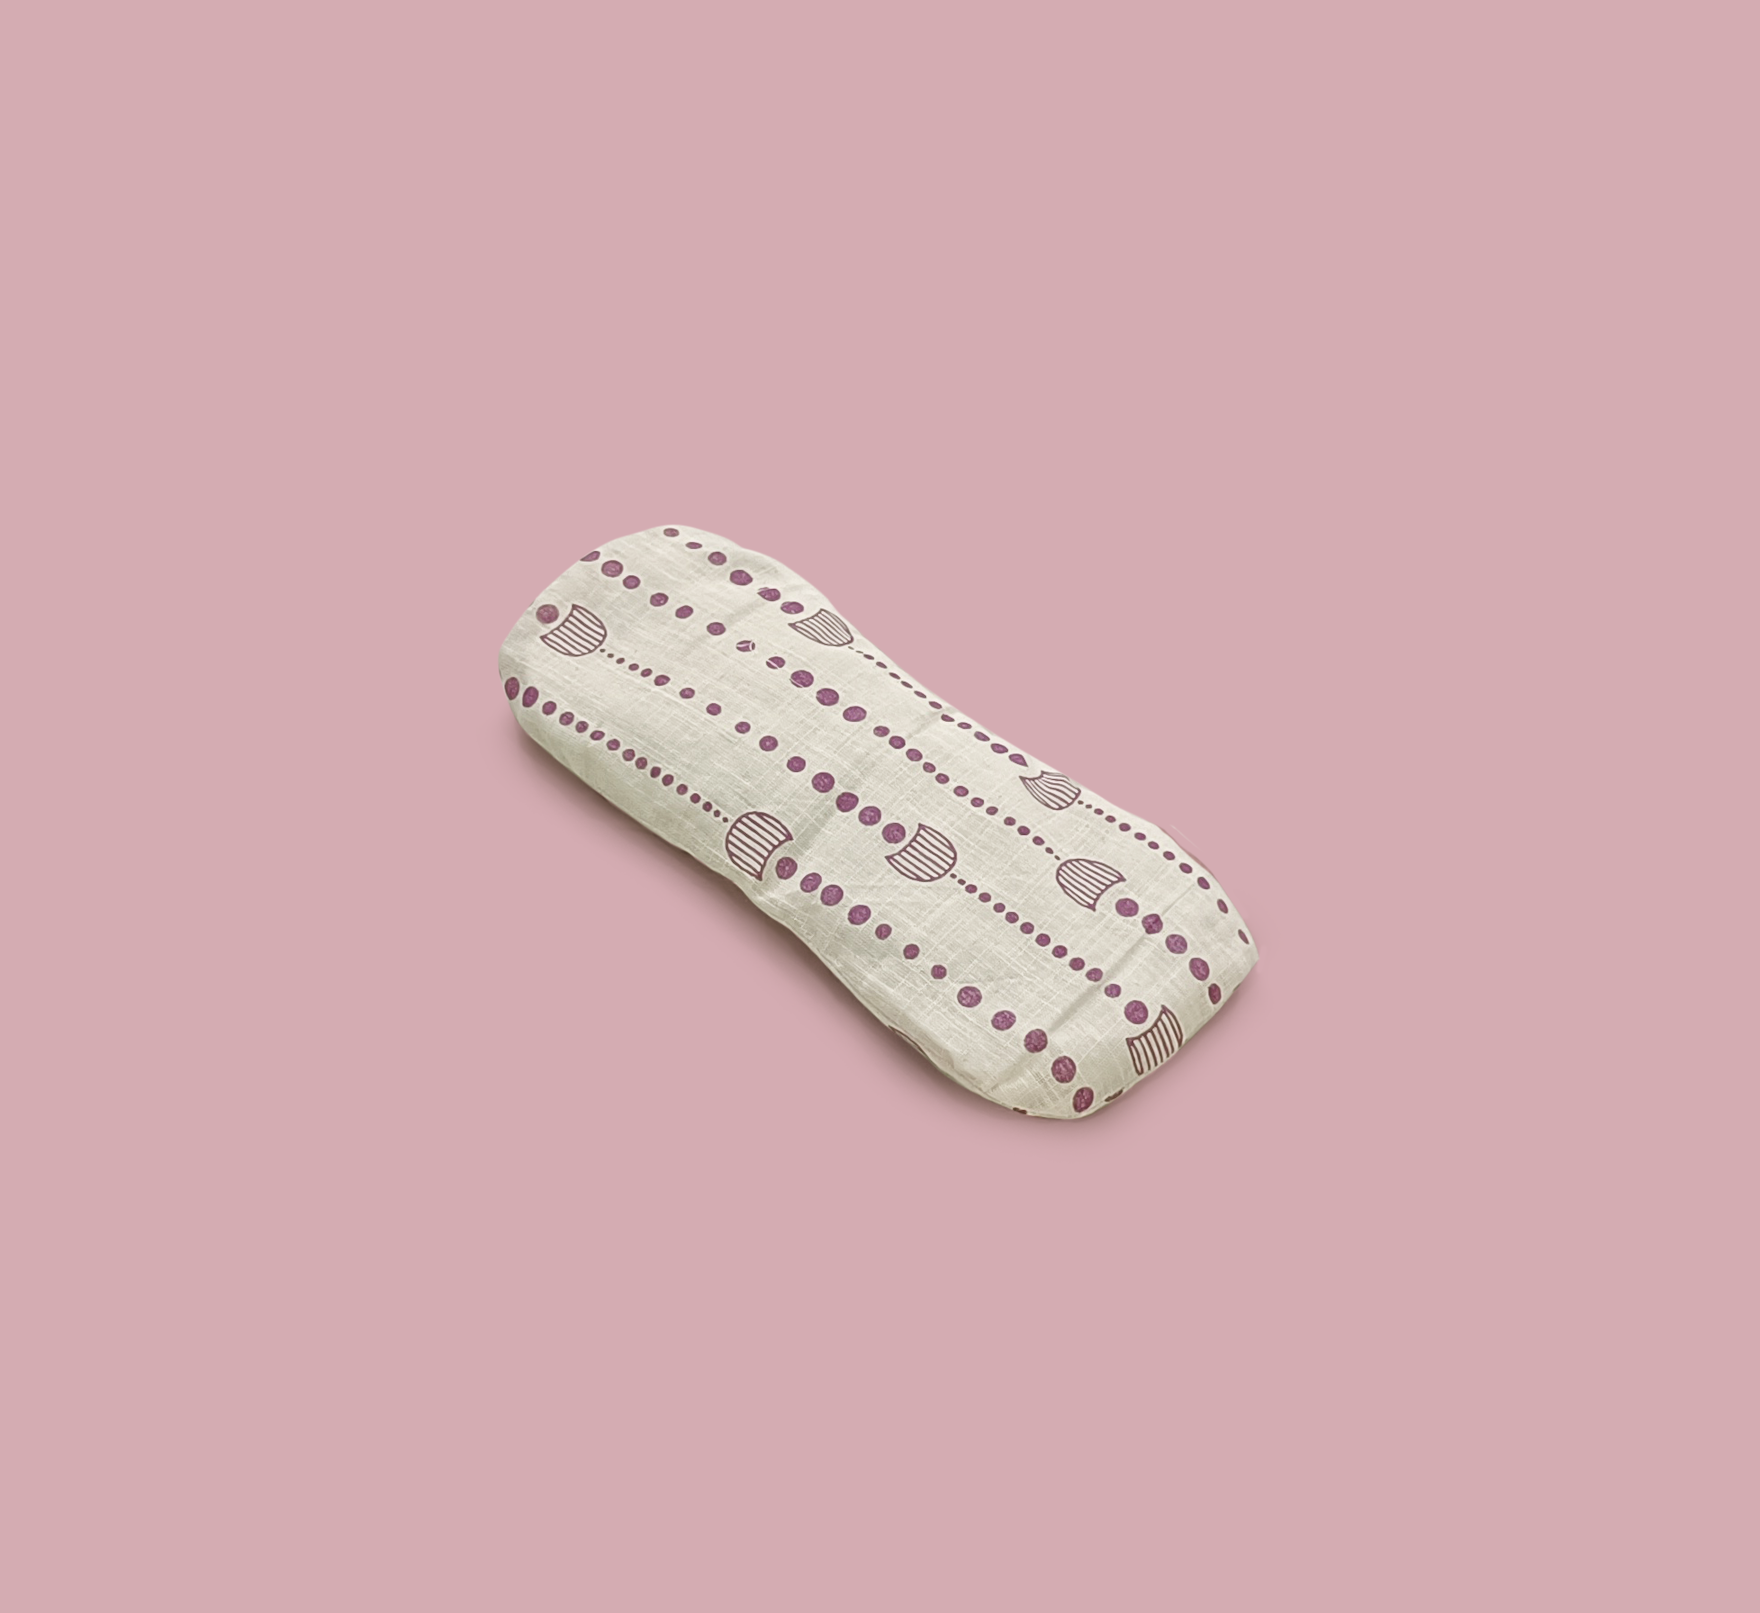 White and purple Organic Cotton relaxation eye pillow with lavender and flaxseed by kosha yoga co